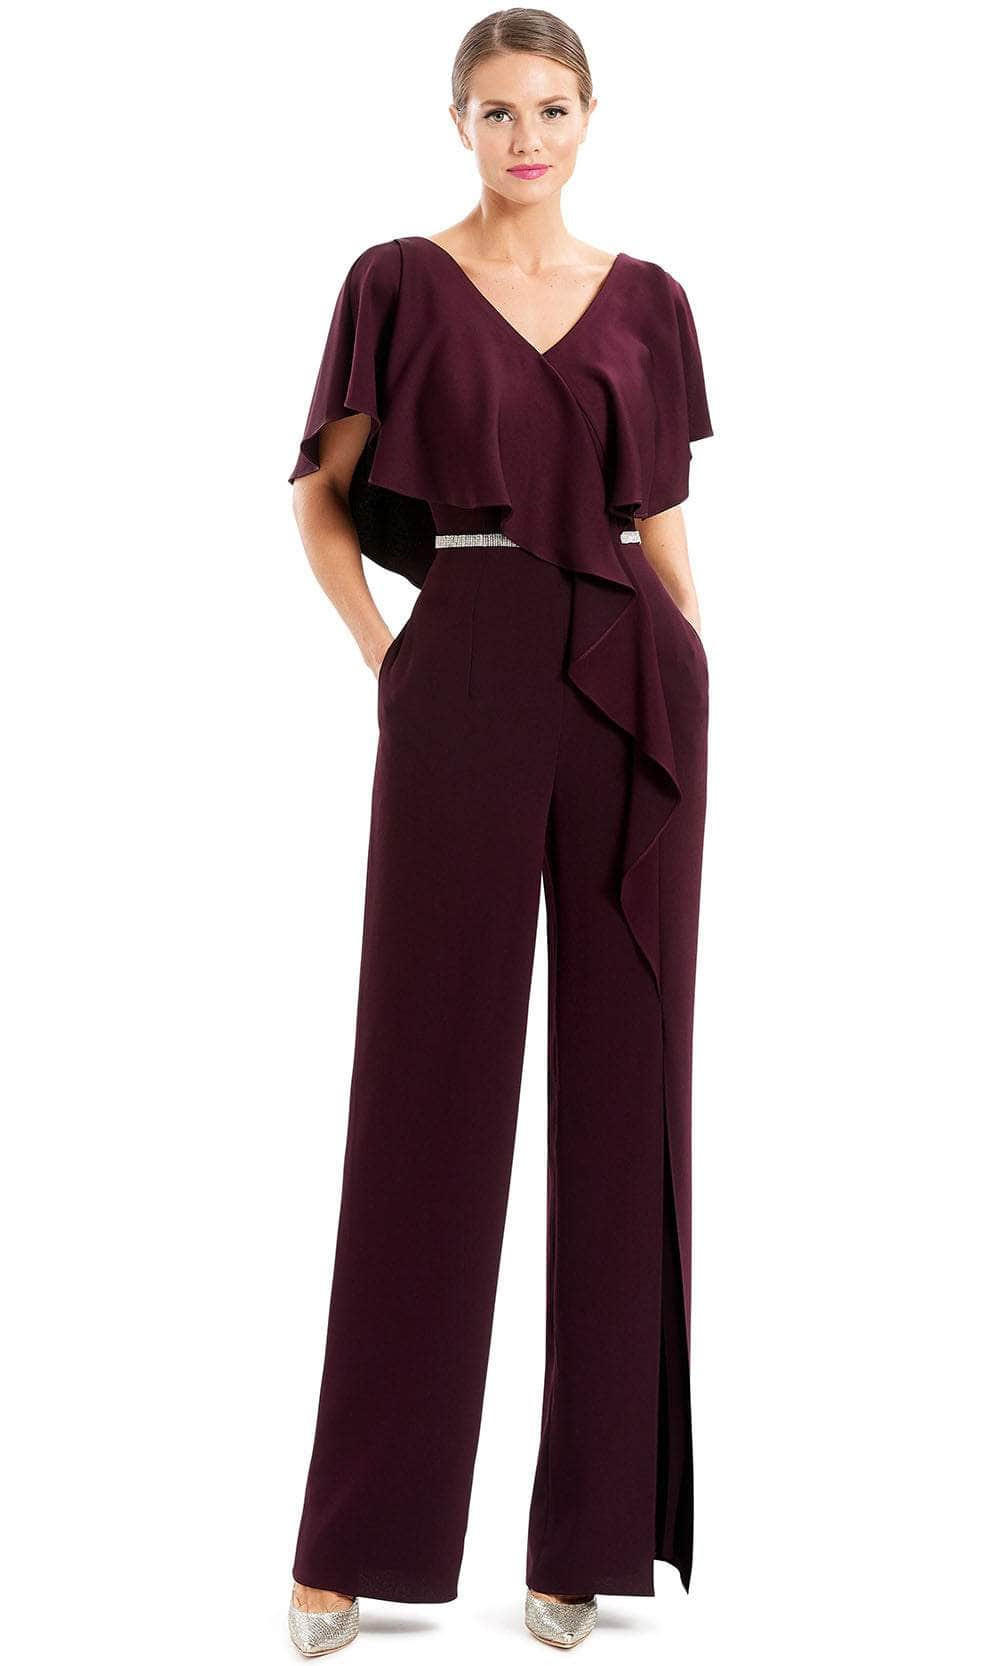 Alexander By Daymor 1669F22 - Ruffled Short Sleeve Formal Jumpsuit Special Occasion Dress 2 / Aubergine